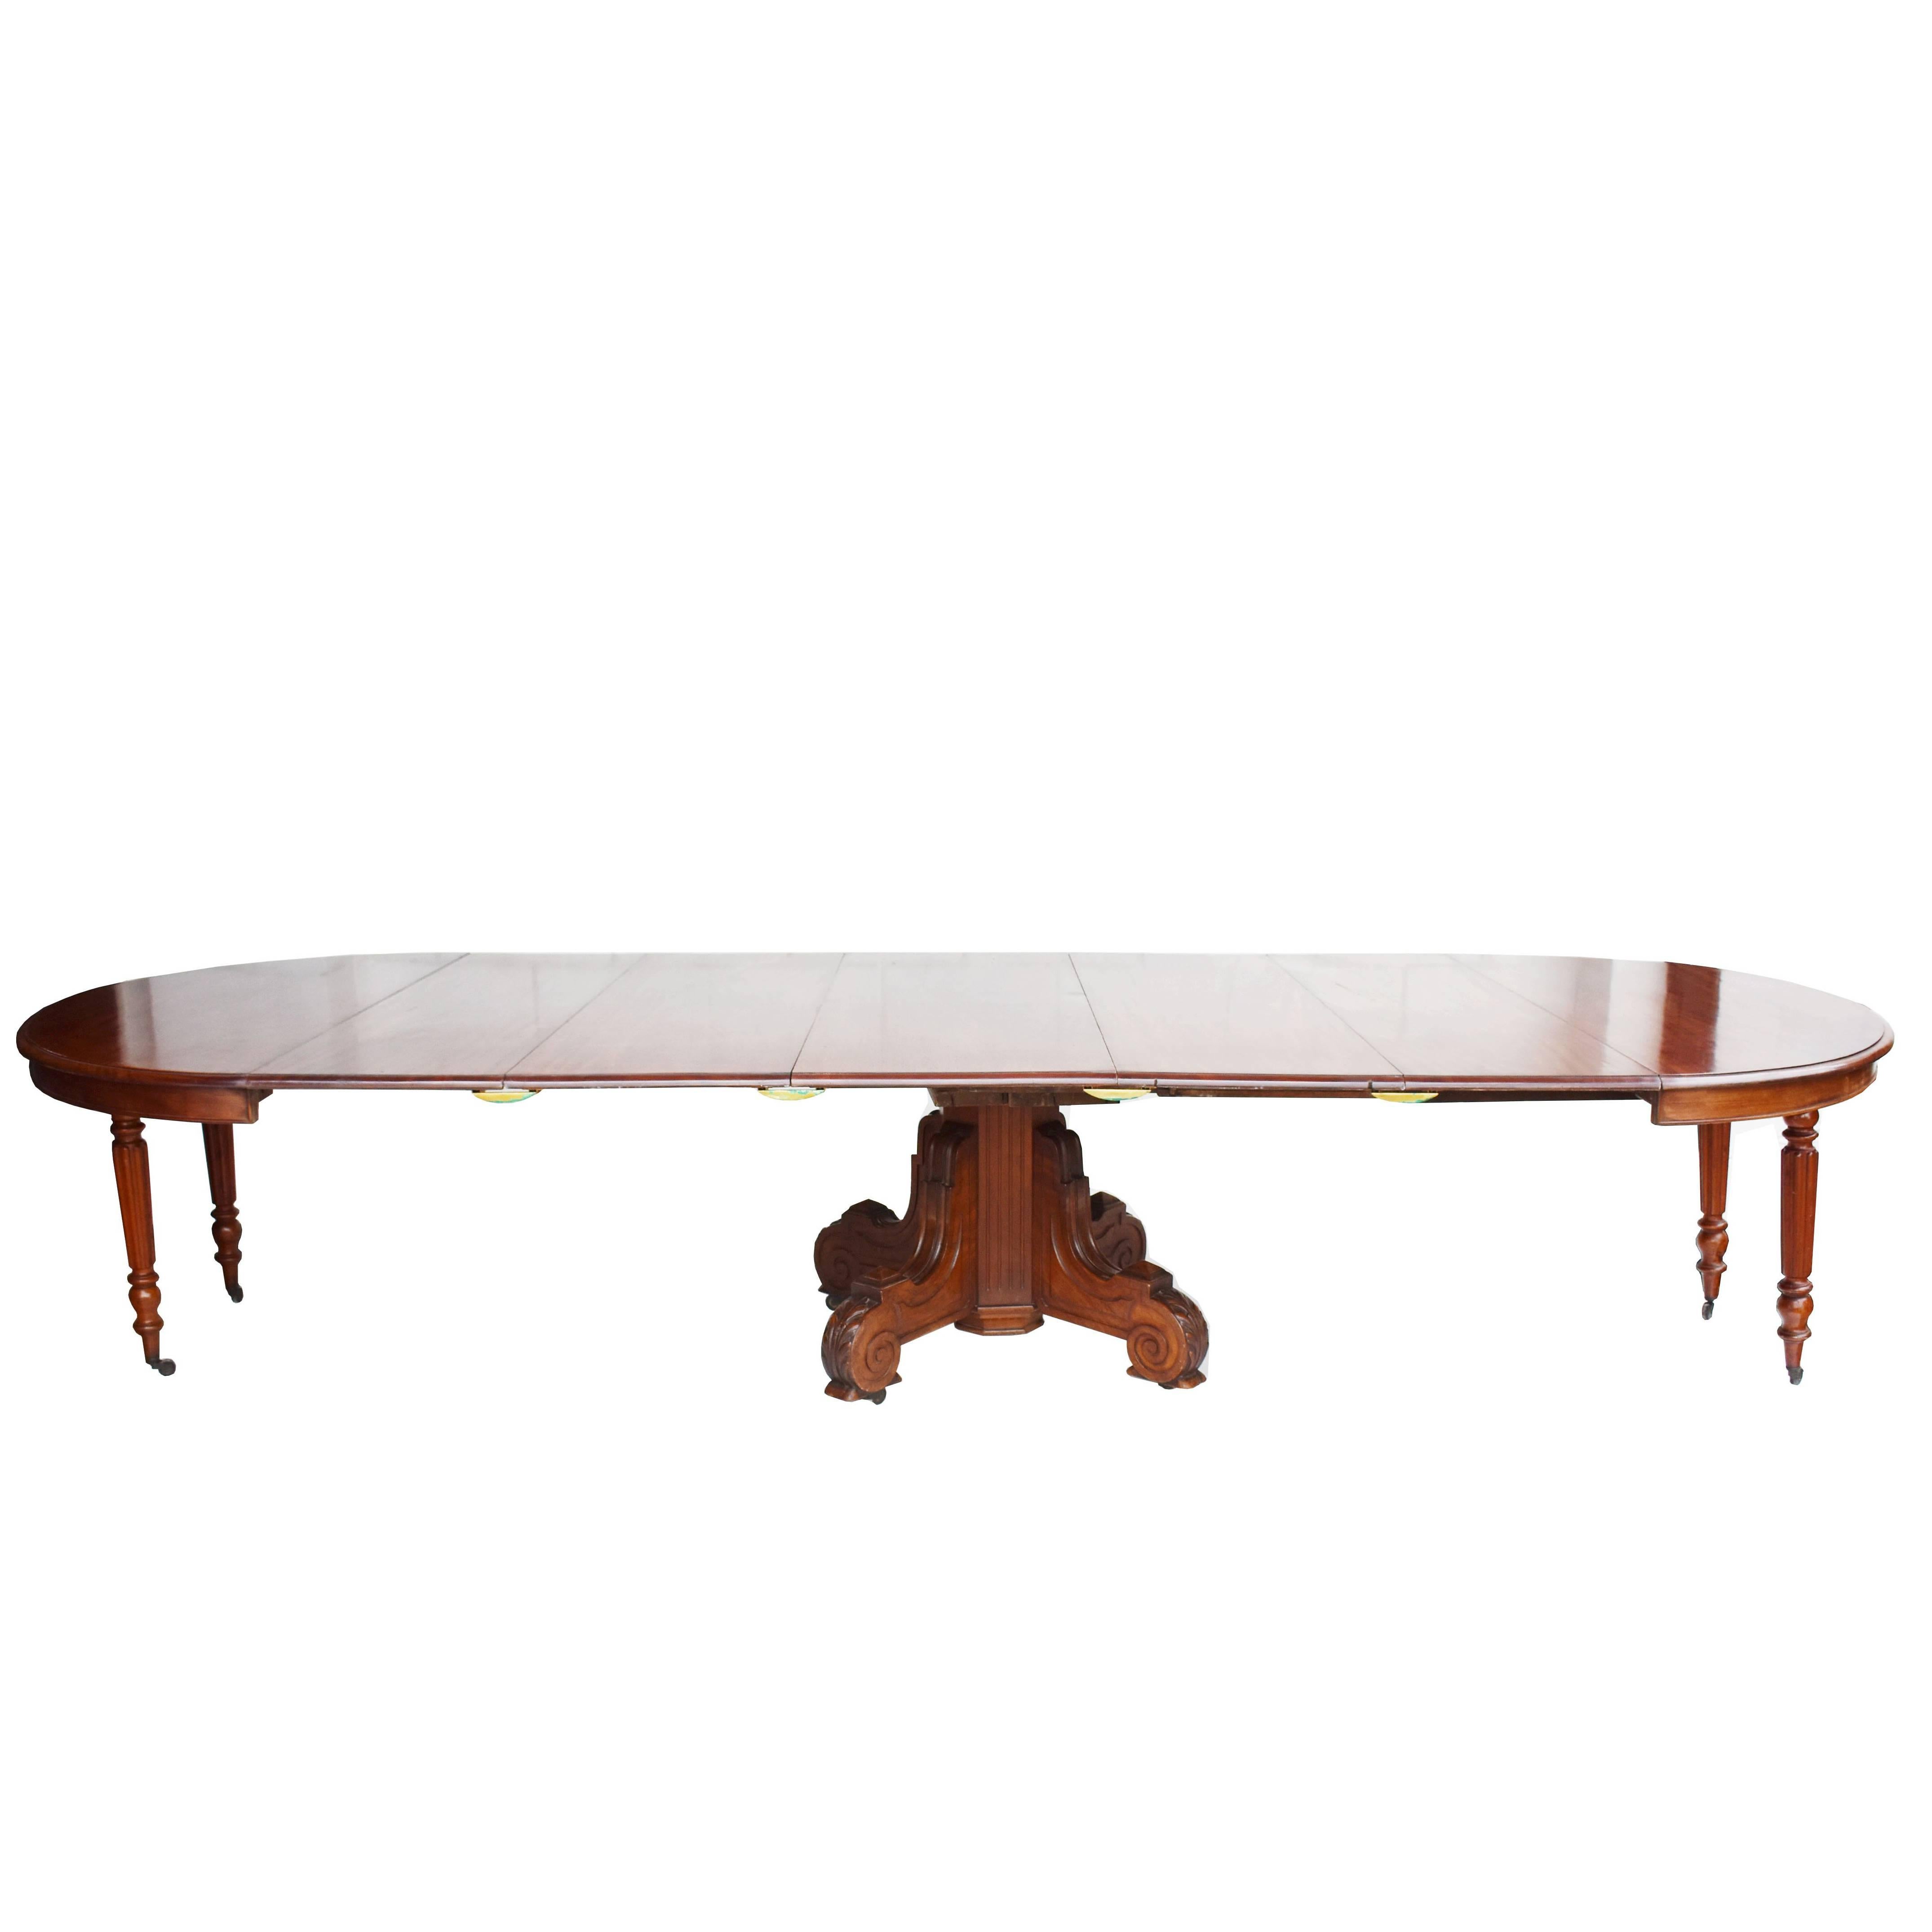 19th Century William IV Mahogany 16 Seat Dining Table For Sale